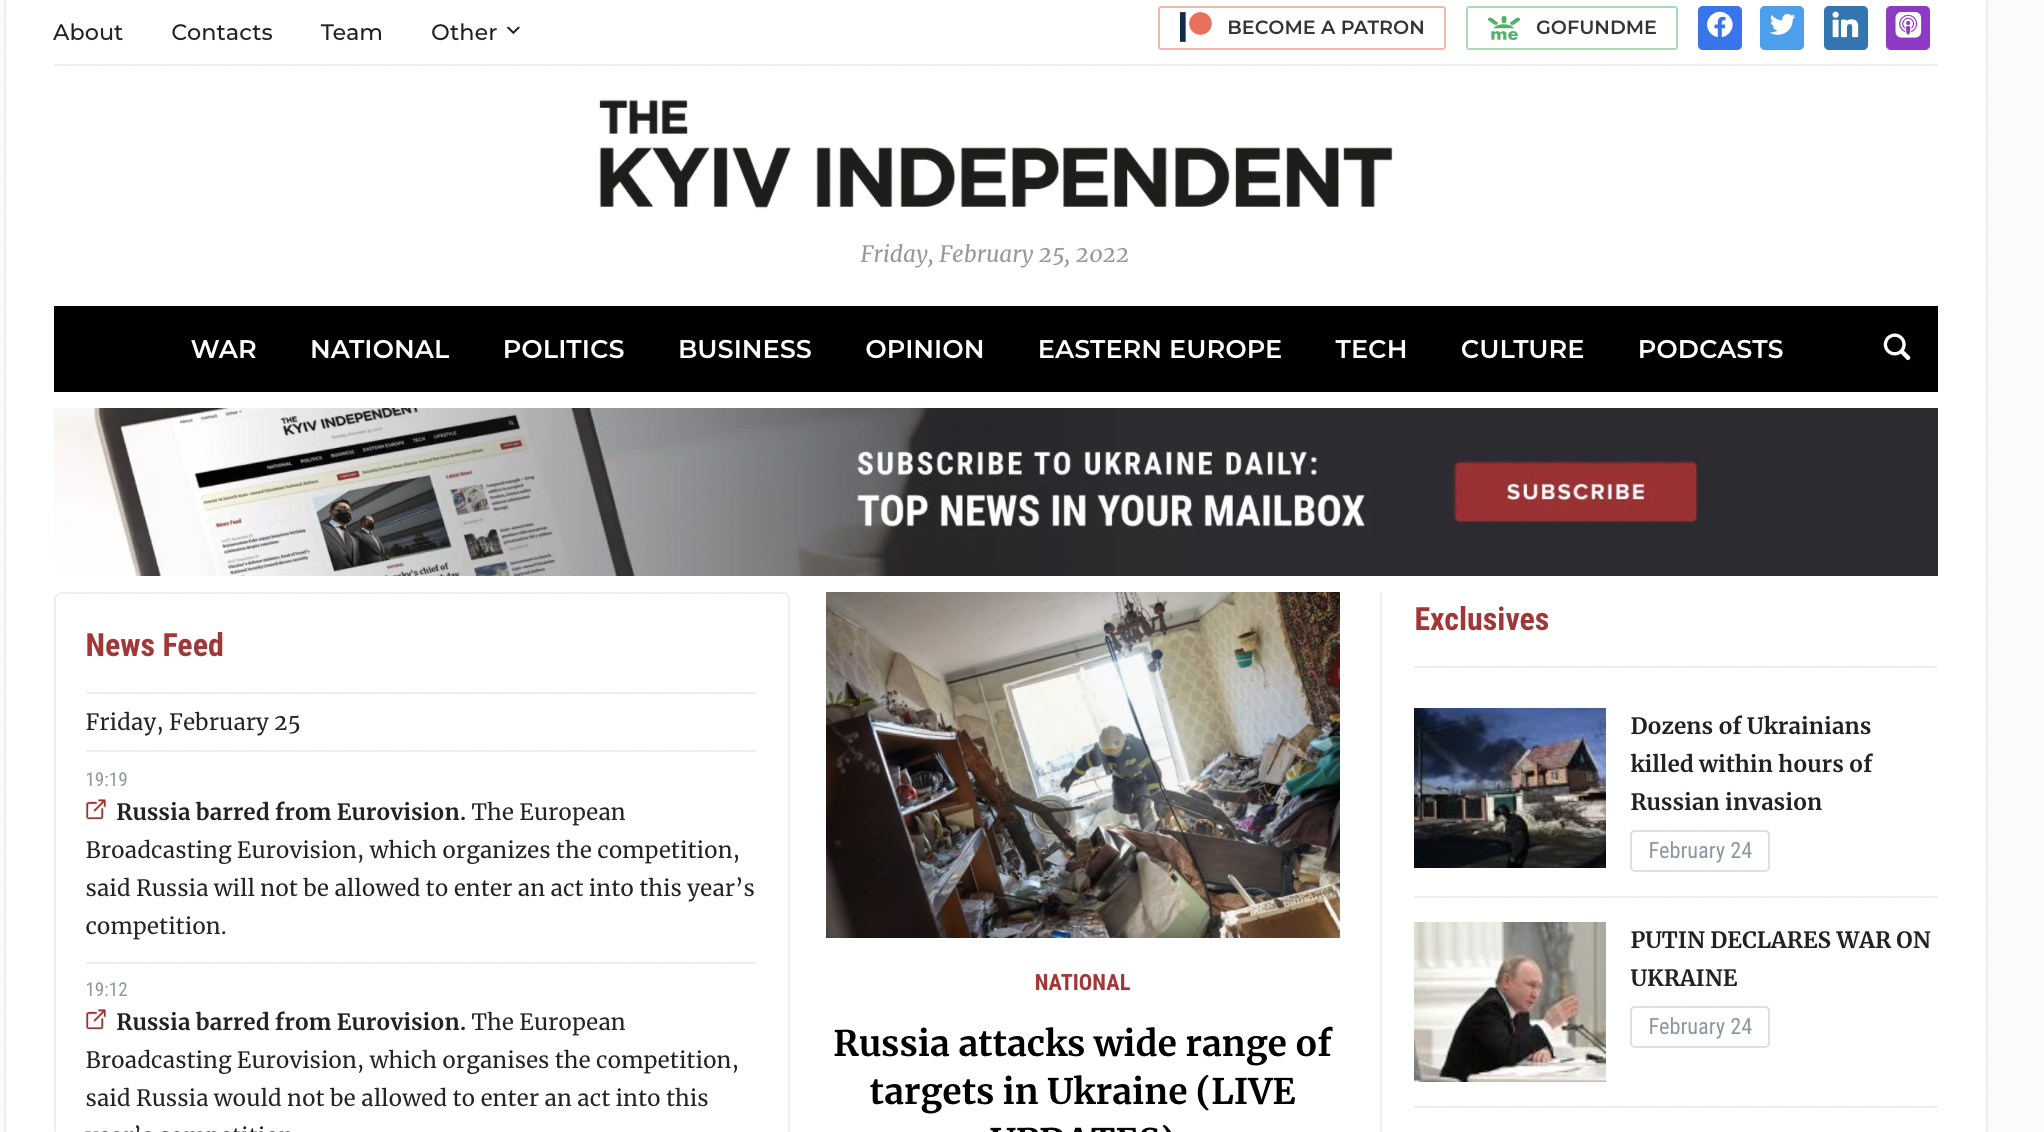 the-kyiv-independent-seeks-donations-to-continue-critical-ukrainian-news-coverage-1 The-kyiv-independent-seeks-donations-to-continue-critical-ukrainian-news-coverage-1